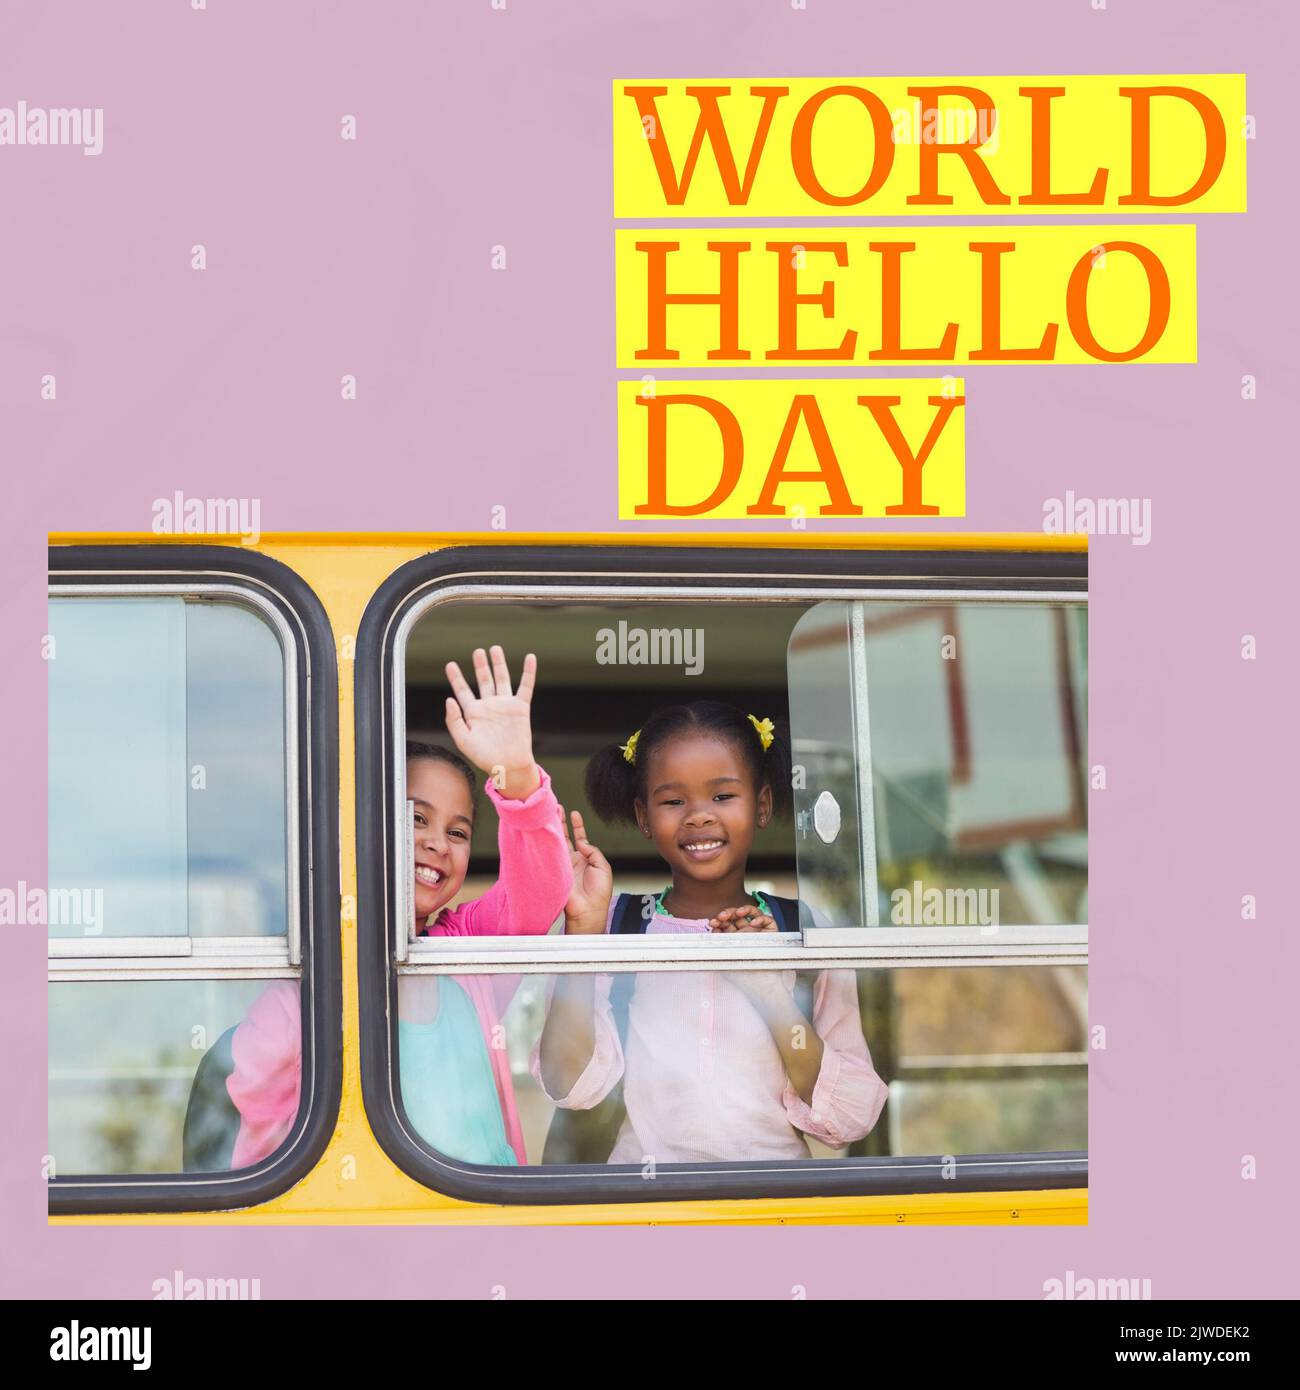 Composition of world hello day text with diverse schoolchildren waving from school bus Stock Photo